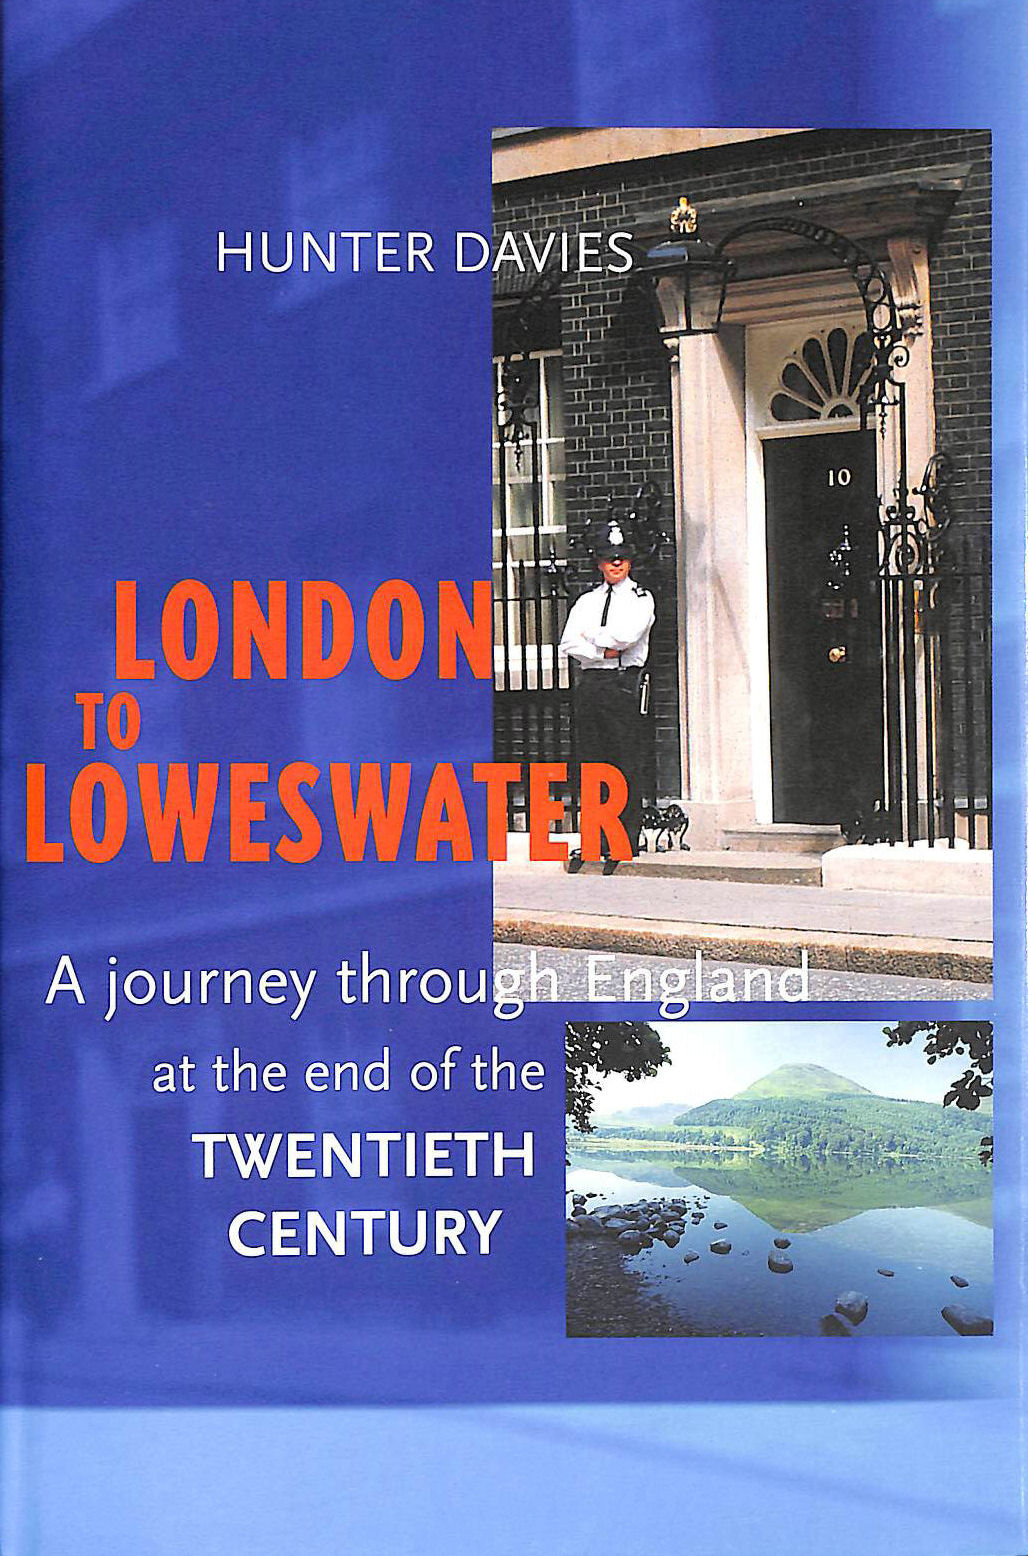 DAVIES, HUNTER - London to Loweswater: A Journey Through England at the End of the Twentieth Century